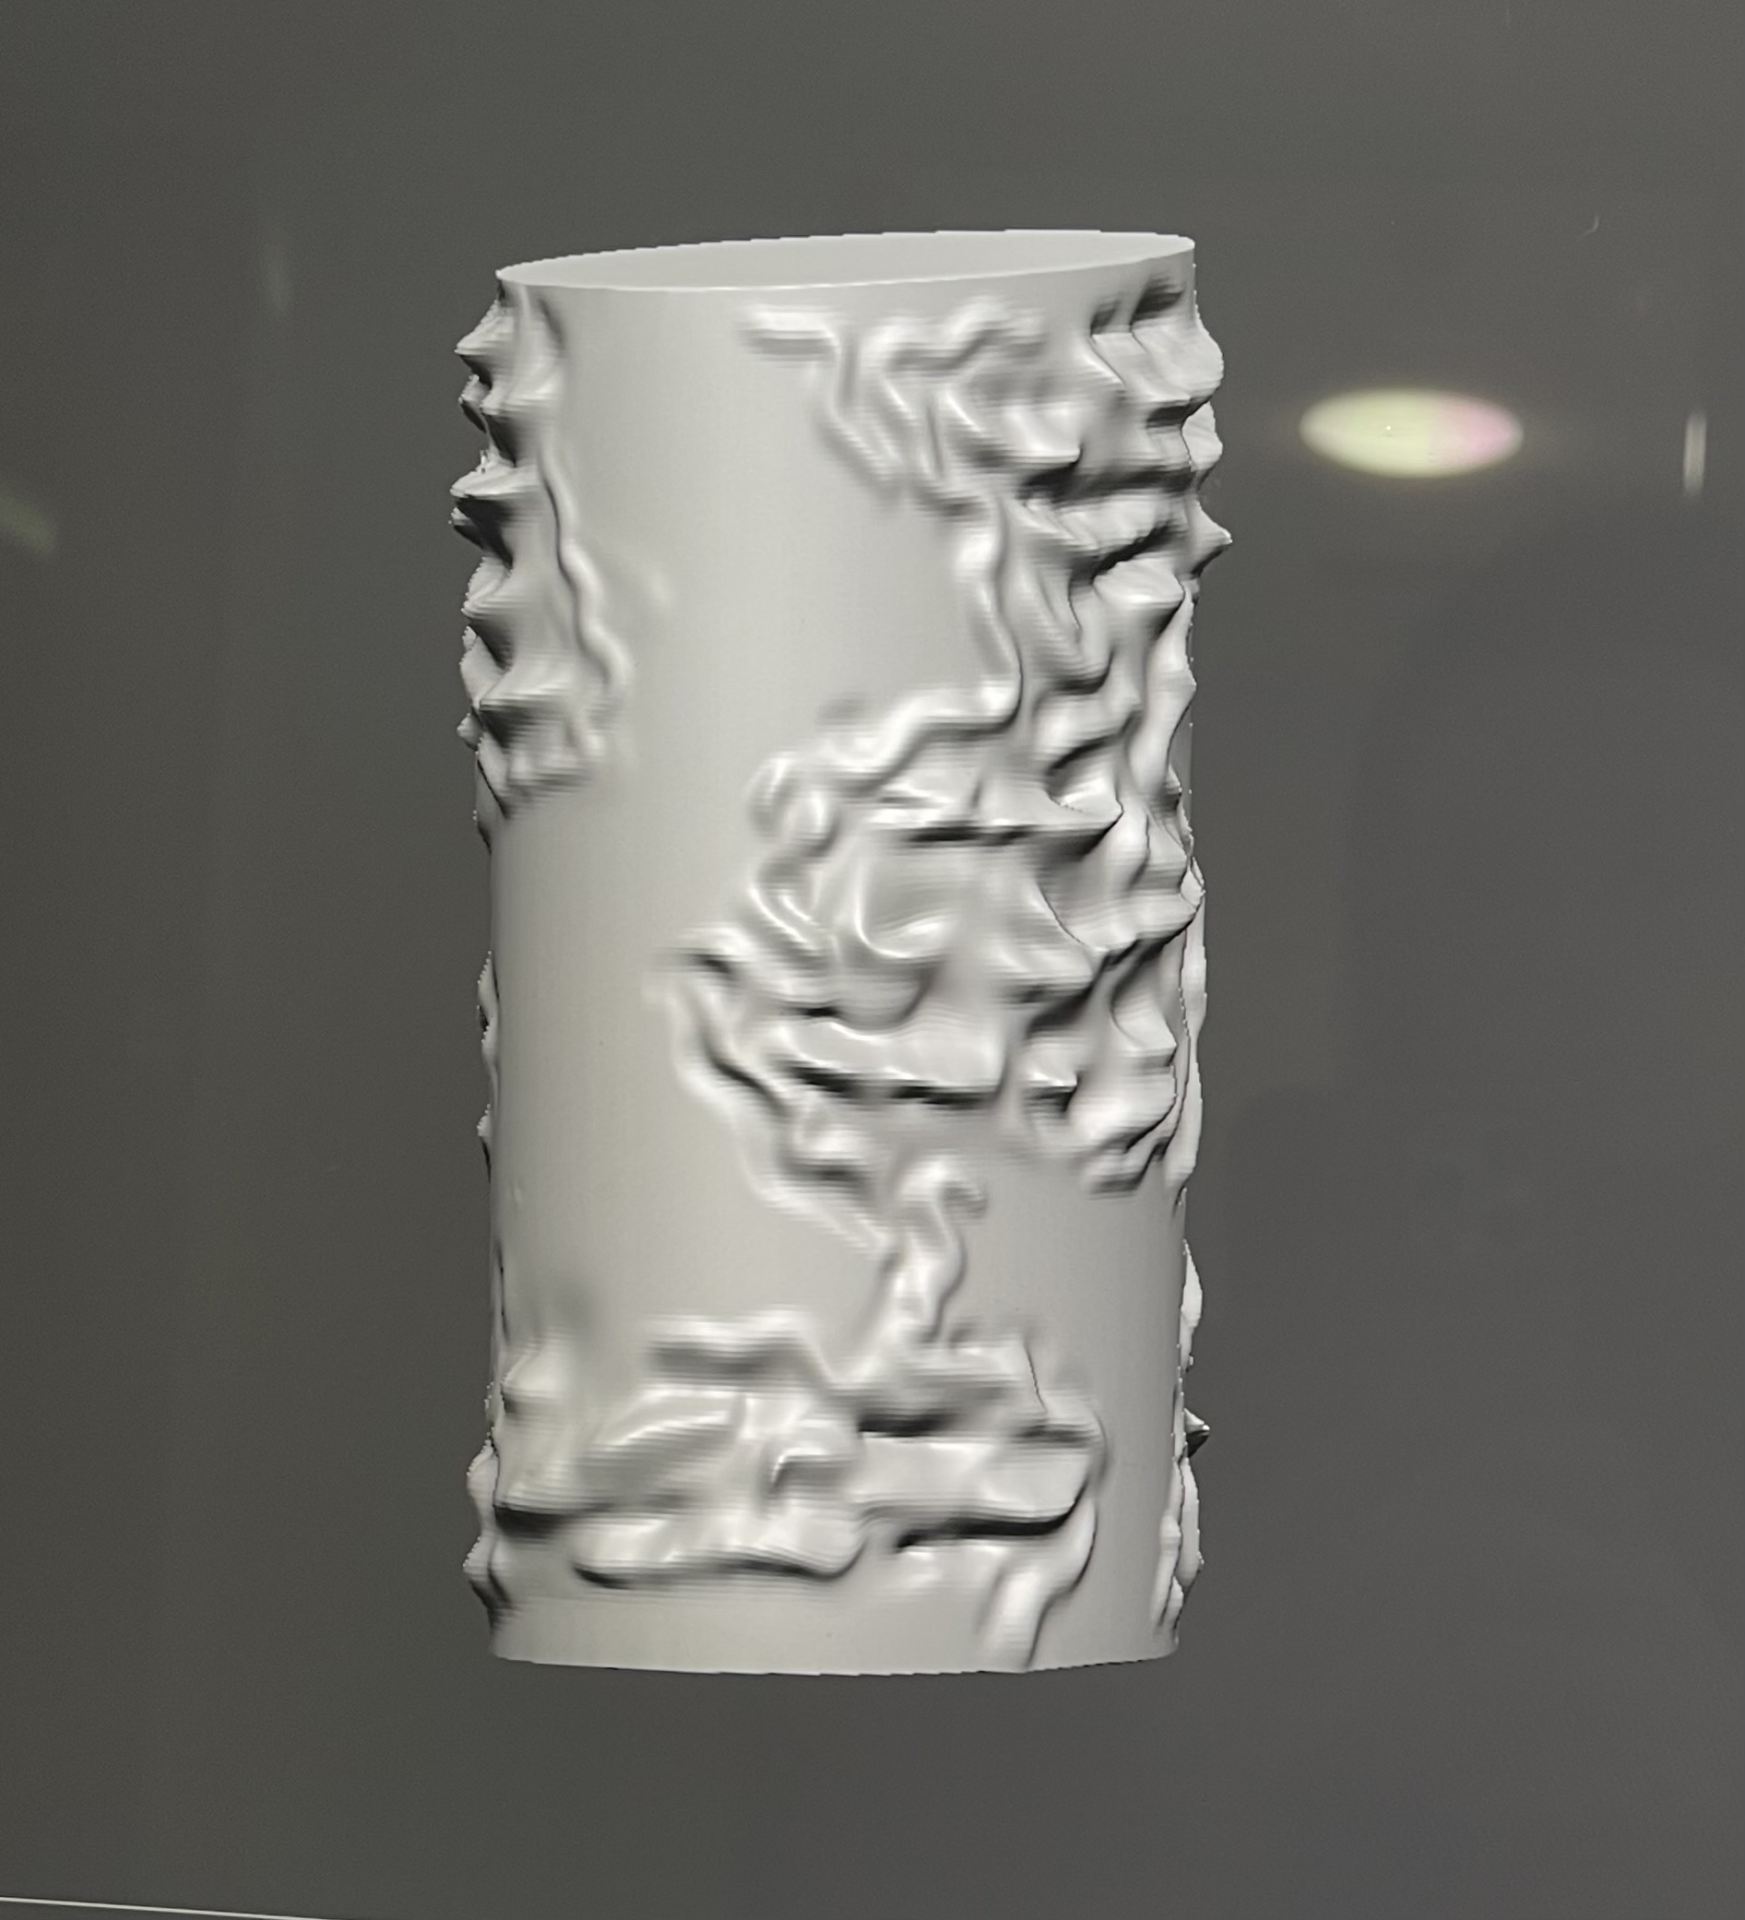 A screens hotted image of a grey object designed using the 3D sculpting software, Zbrush.